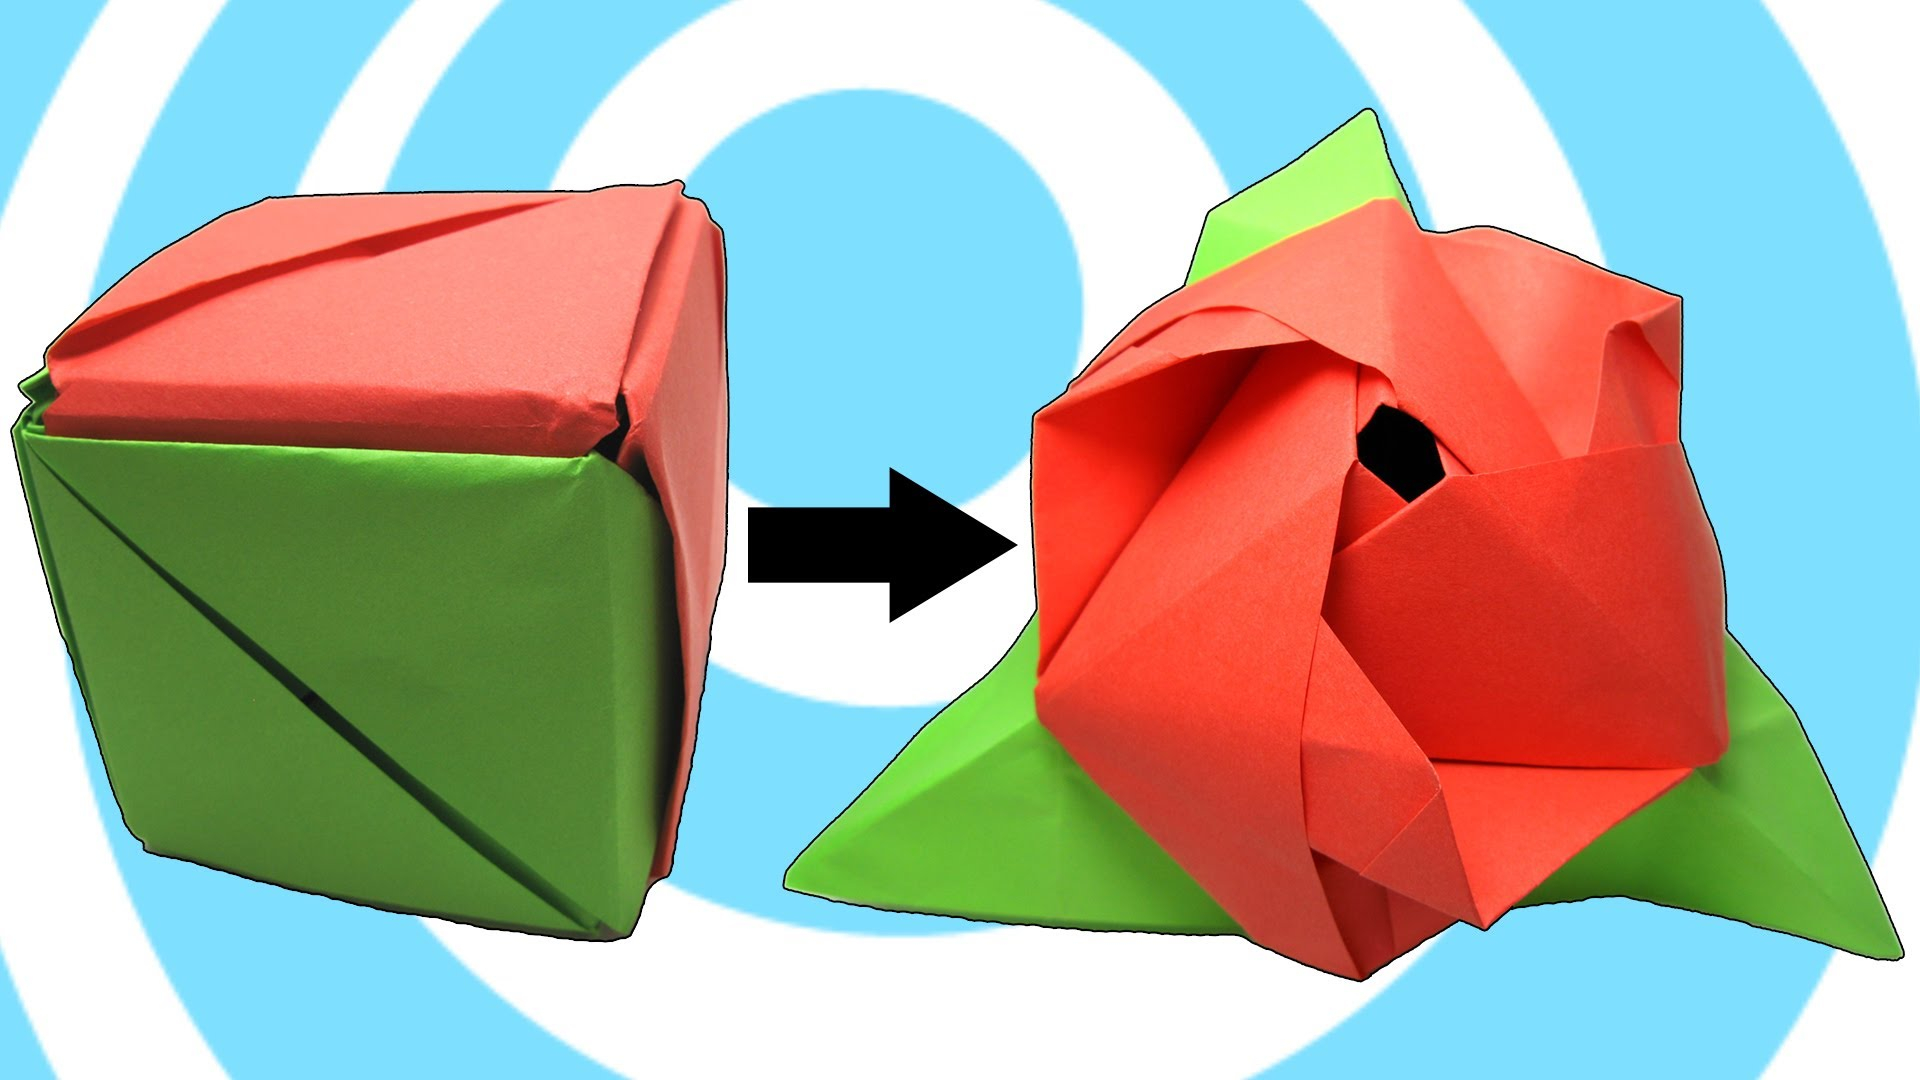 Origami Ideas Step By Step Modular Origami Magic Rose Cube Instructions Youtube